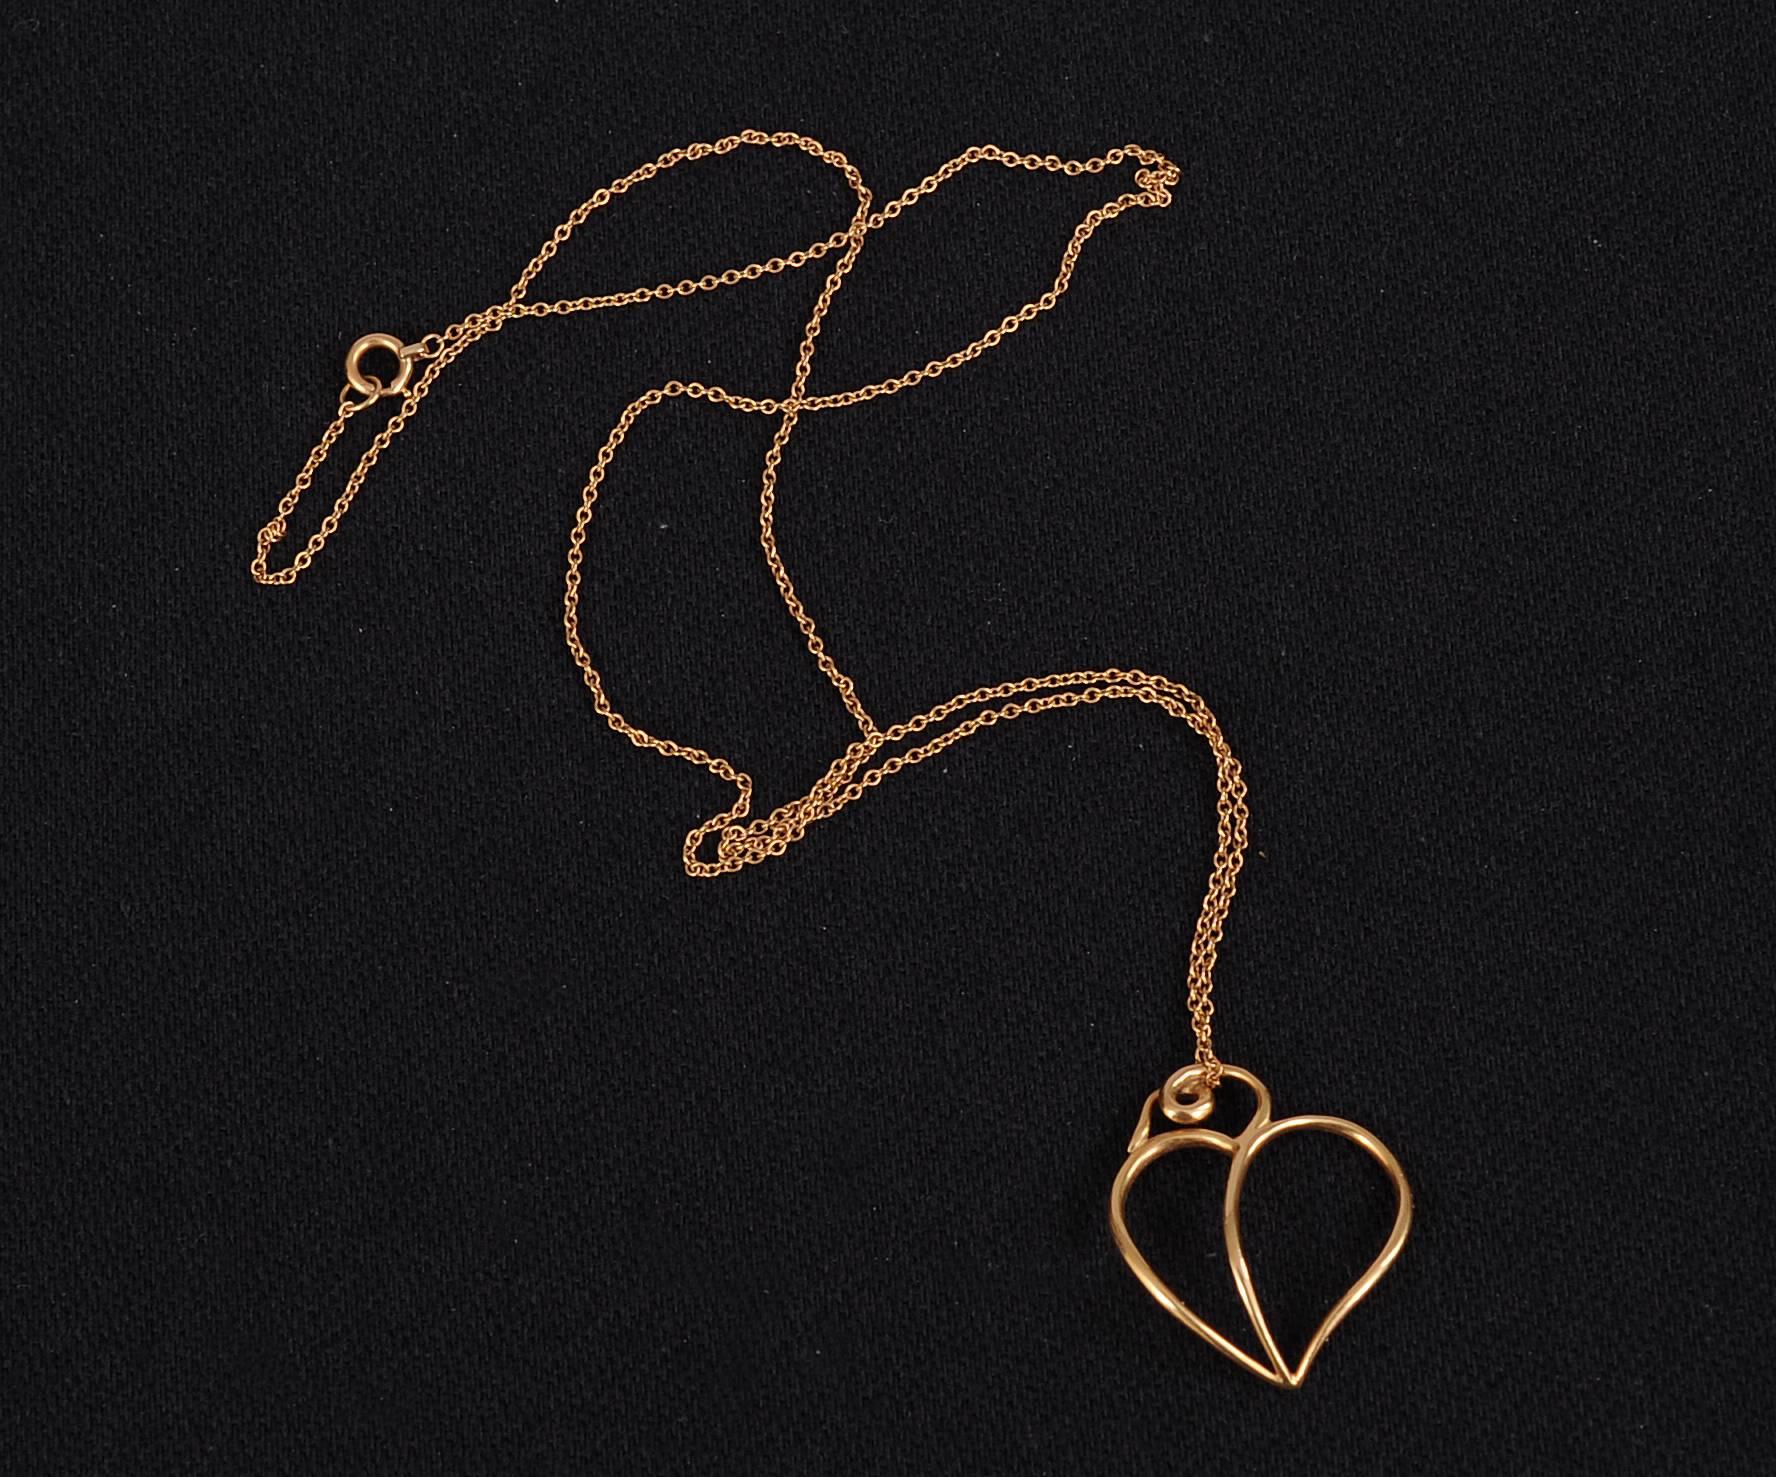 Paloma Picasso designed a  striking 18K gold heart pendant suspended from  a complementary gold chain for Tiffany & Co. in 1980. The heart is signed Paloma Picasso, 18K, 1980, and Tiffany & Co. on the back. It is in excellent condition and comes